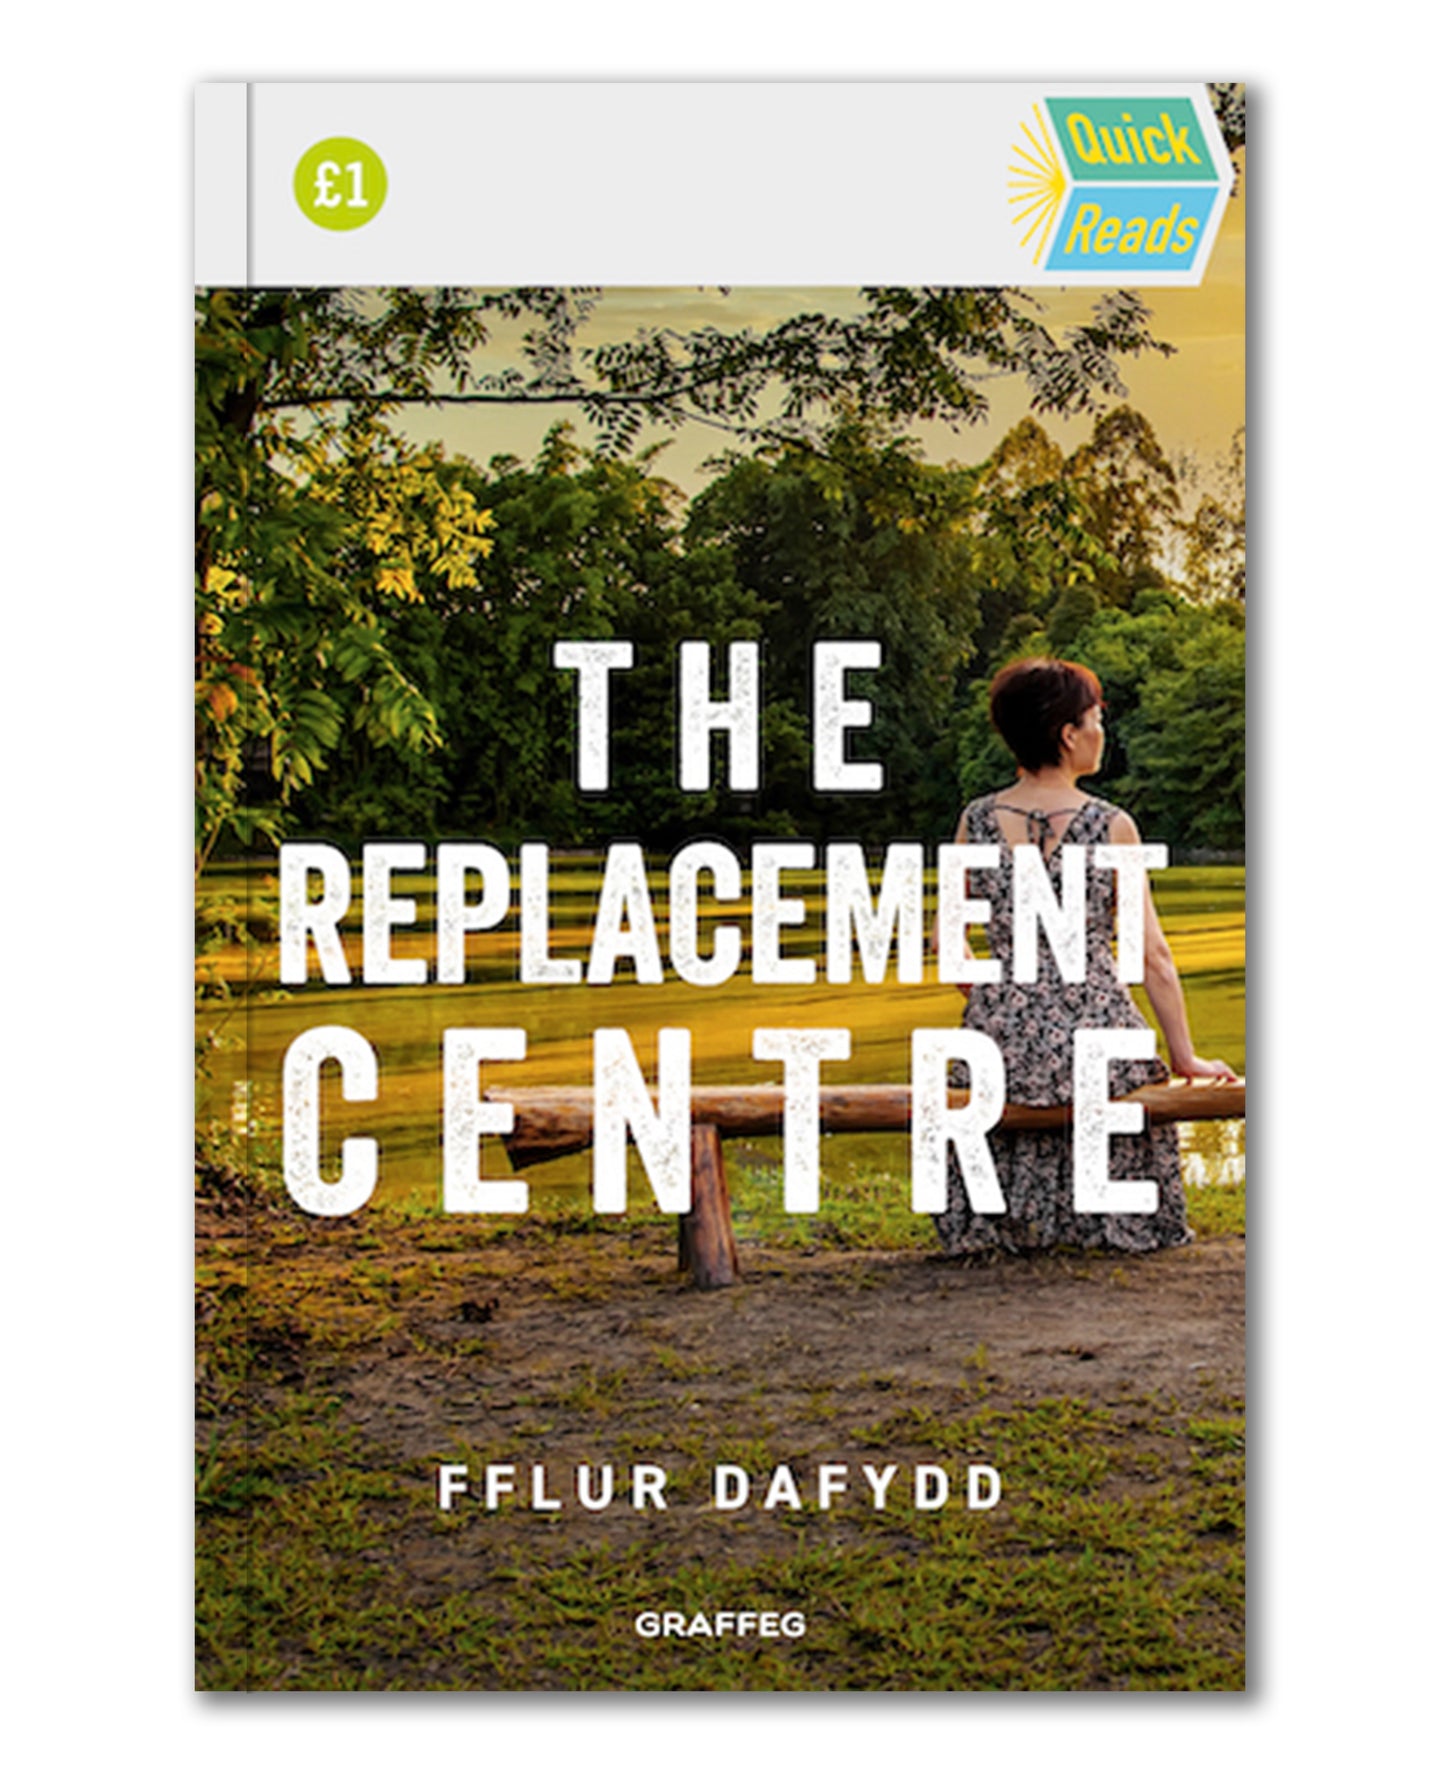 The Replacement Centre